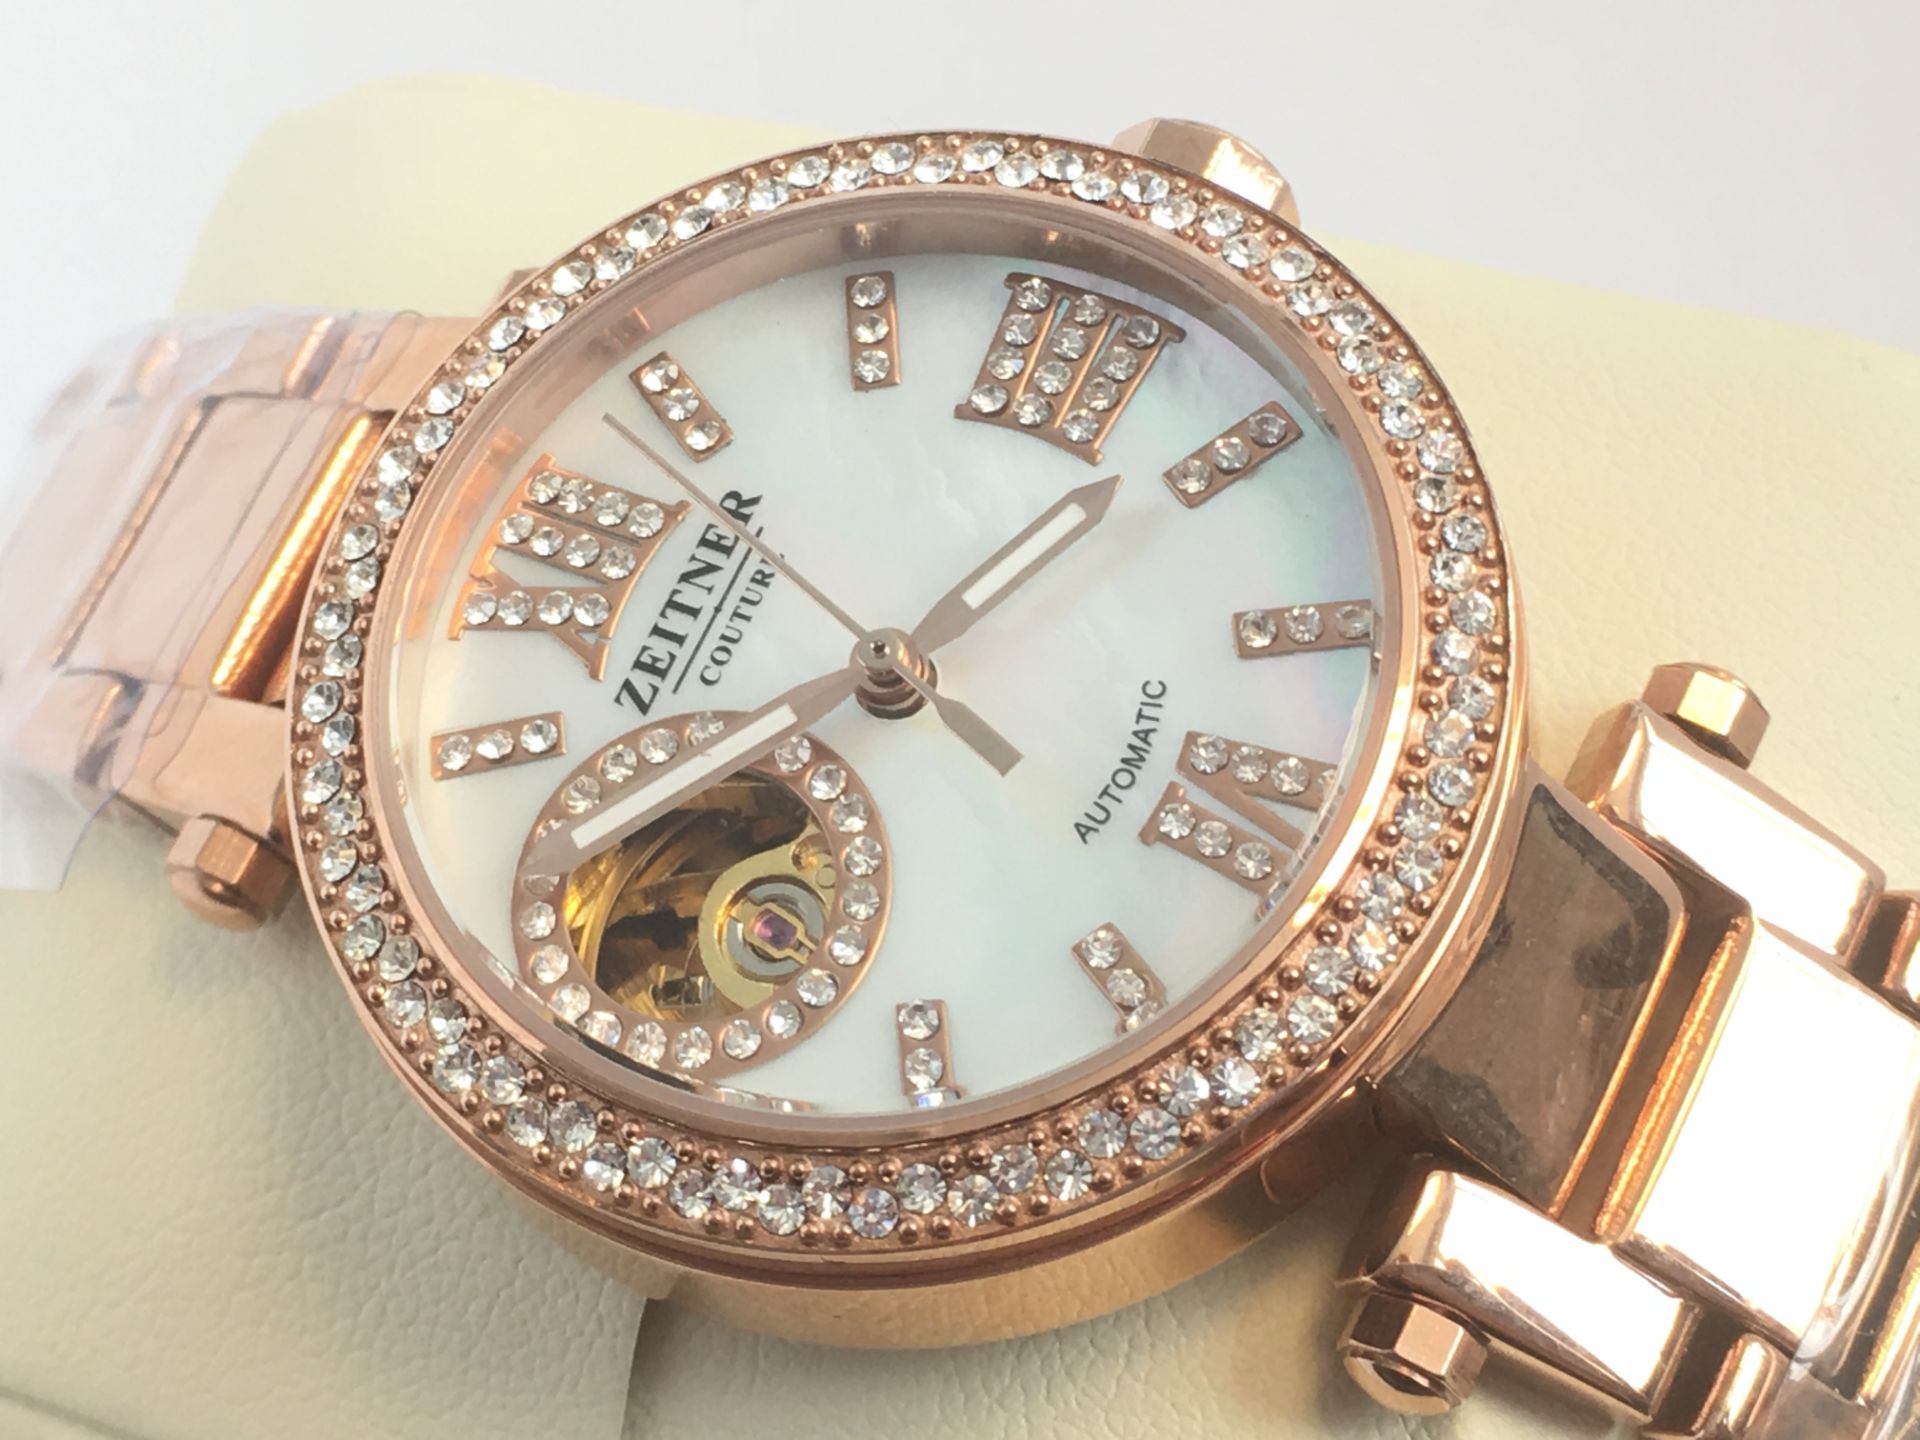 ZEITNER COUTRE AUTOMATIC LADIES WATCH WITH ORIGINAL BOX AND MANNUAL - Image 3 of 4